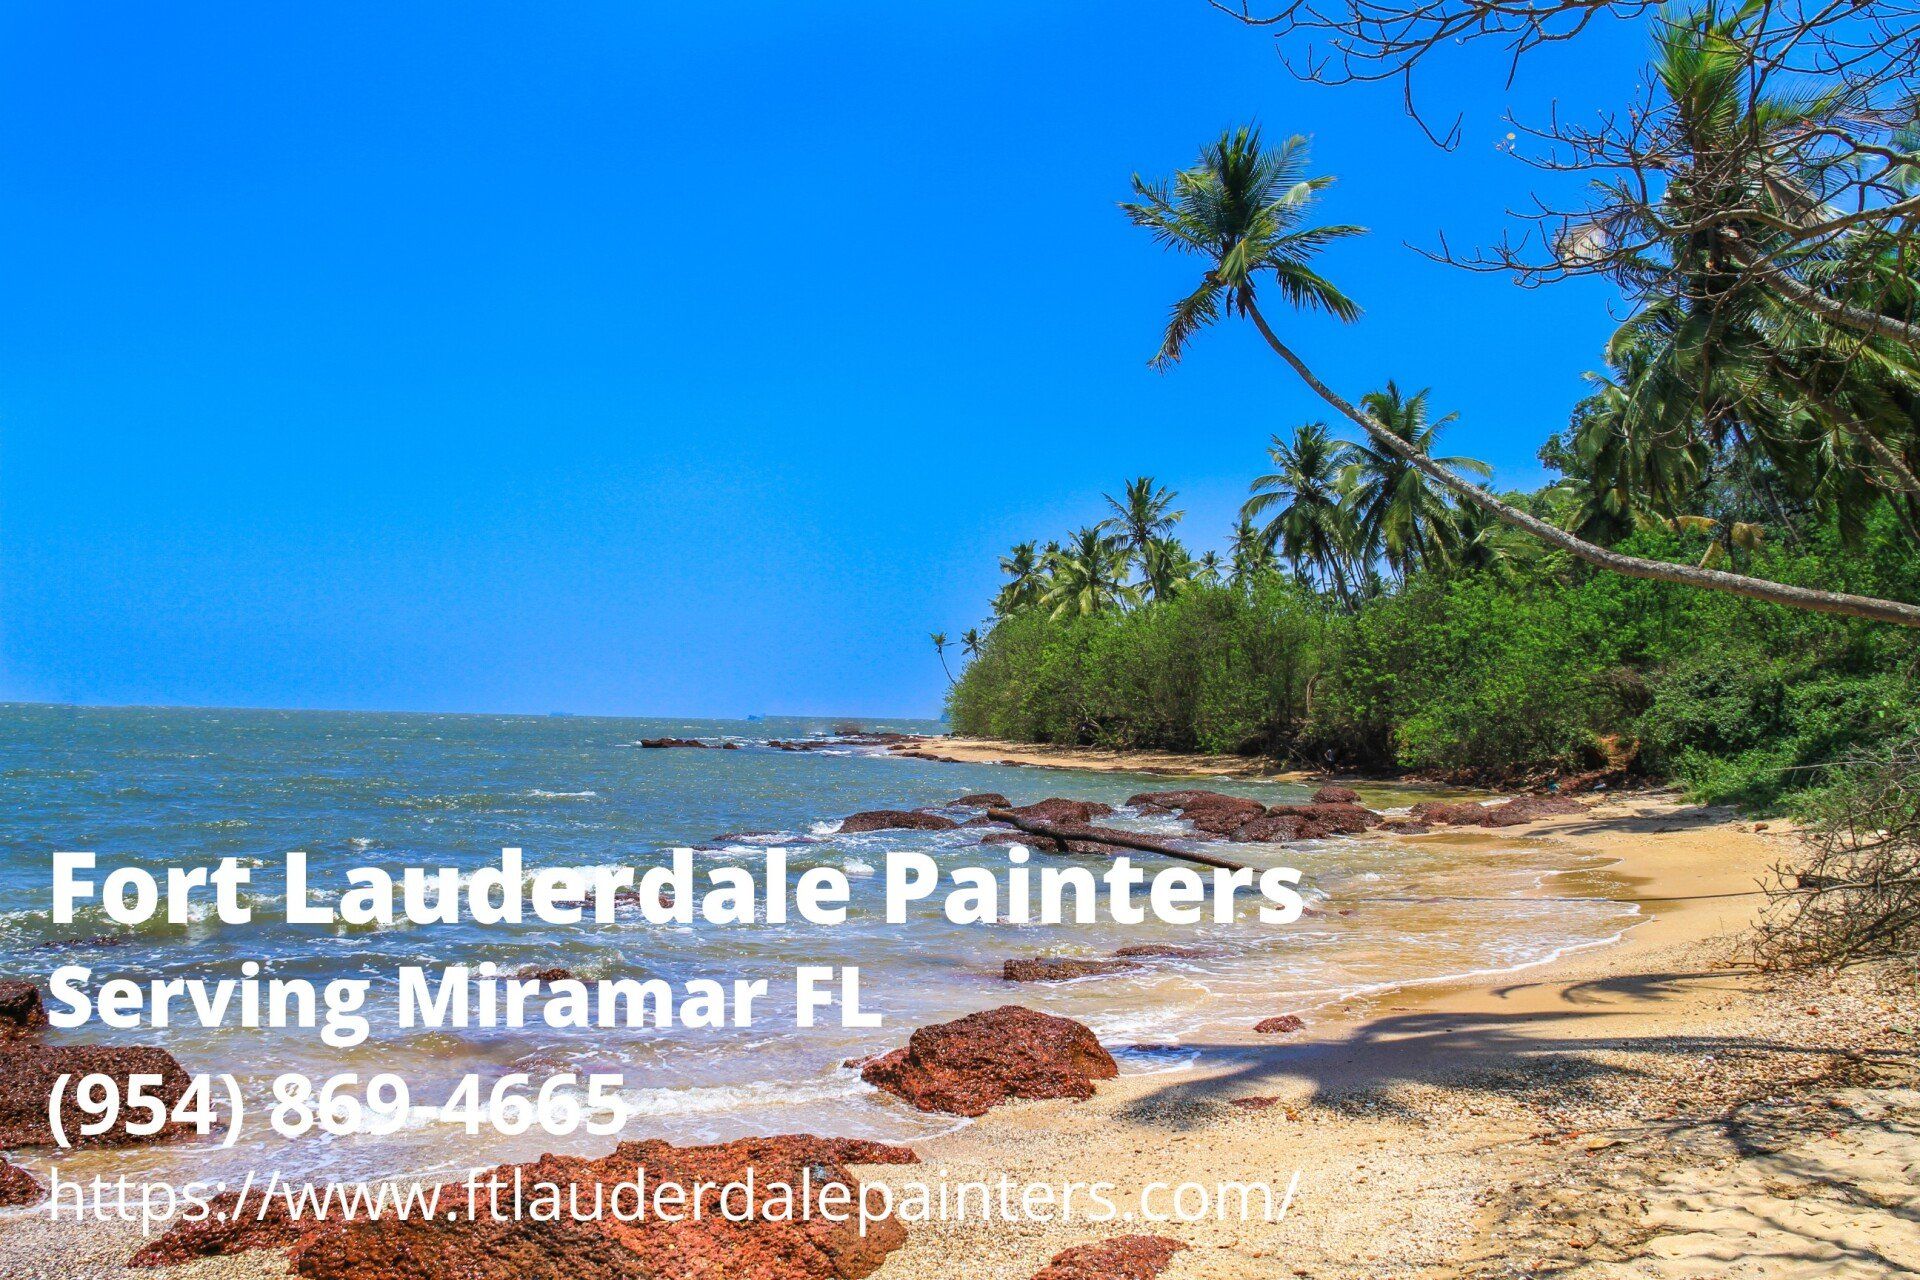 Business info of Fort Lauderdale Painters, a painting company serving Miramar FL